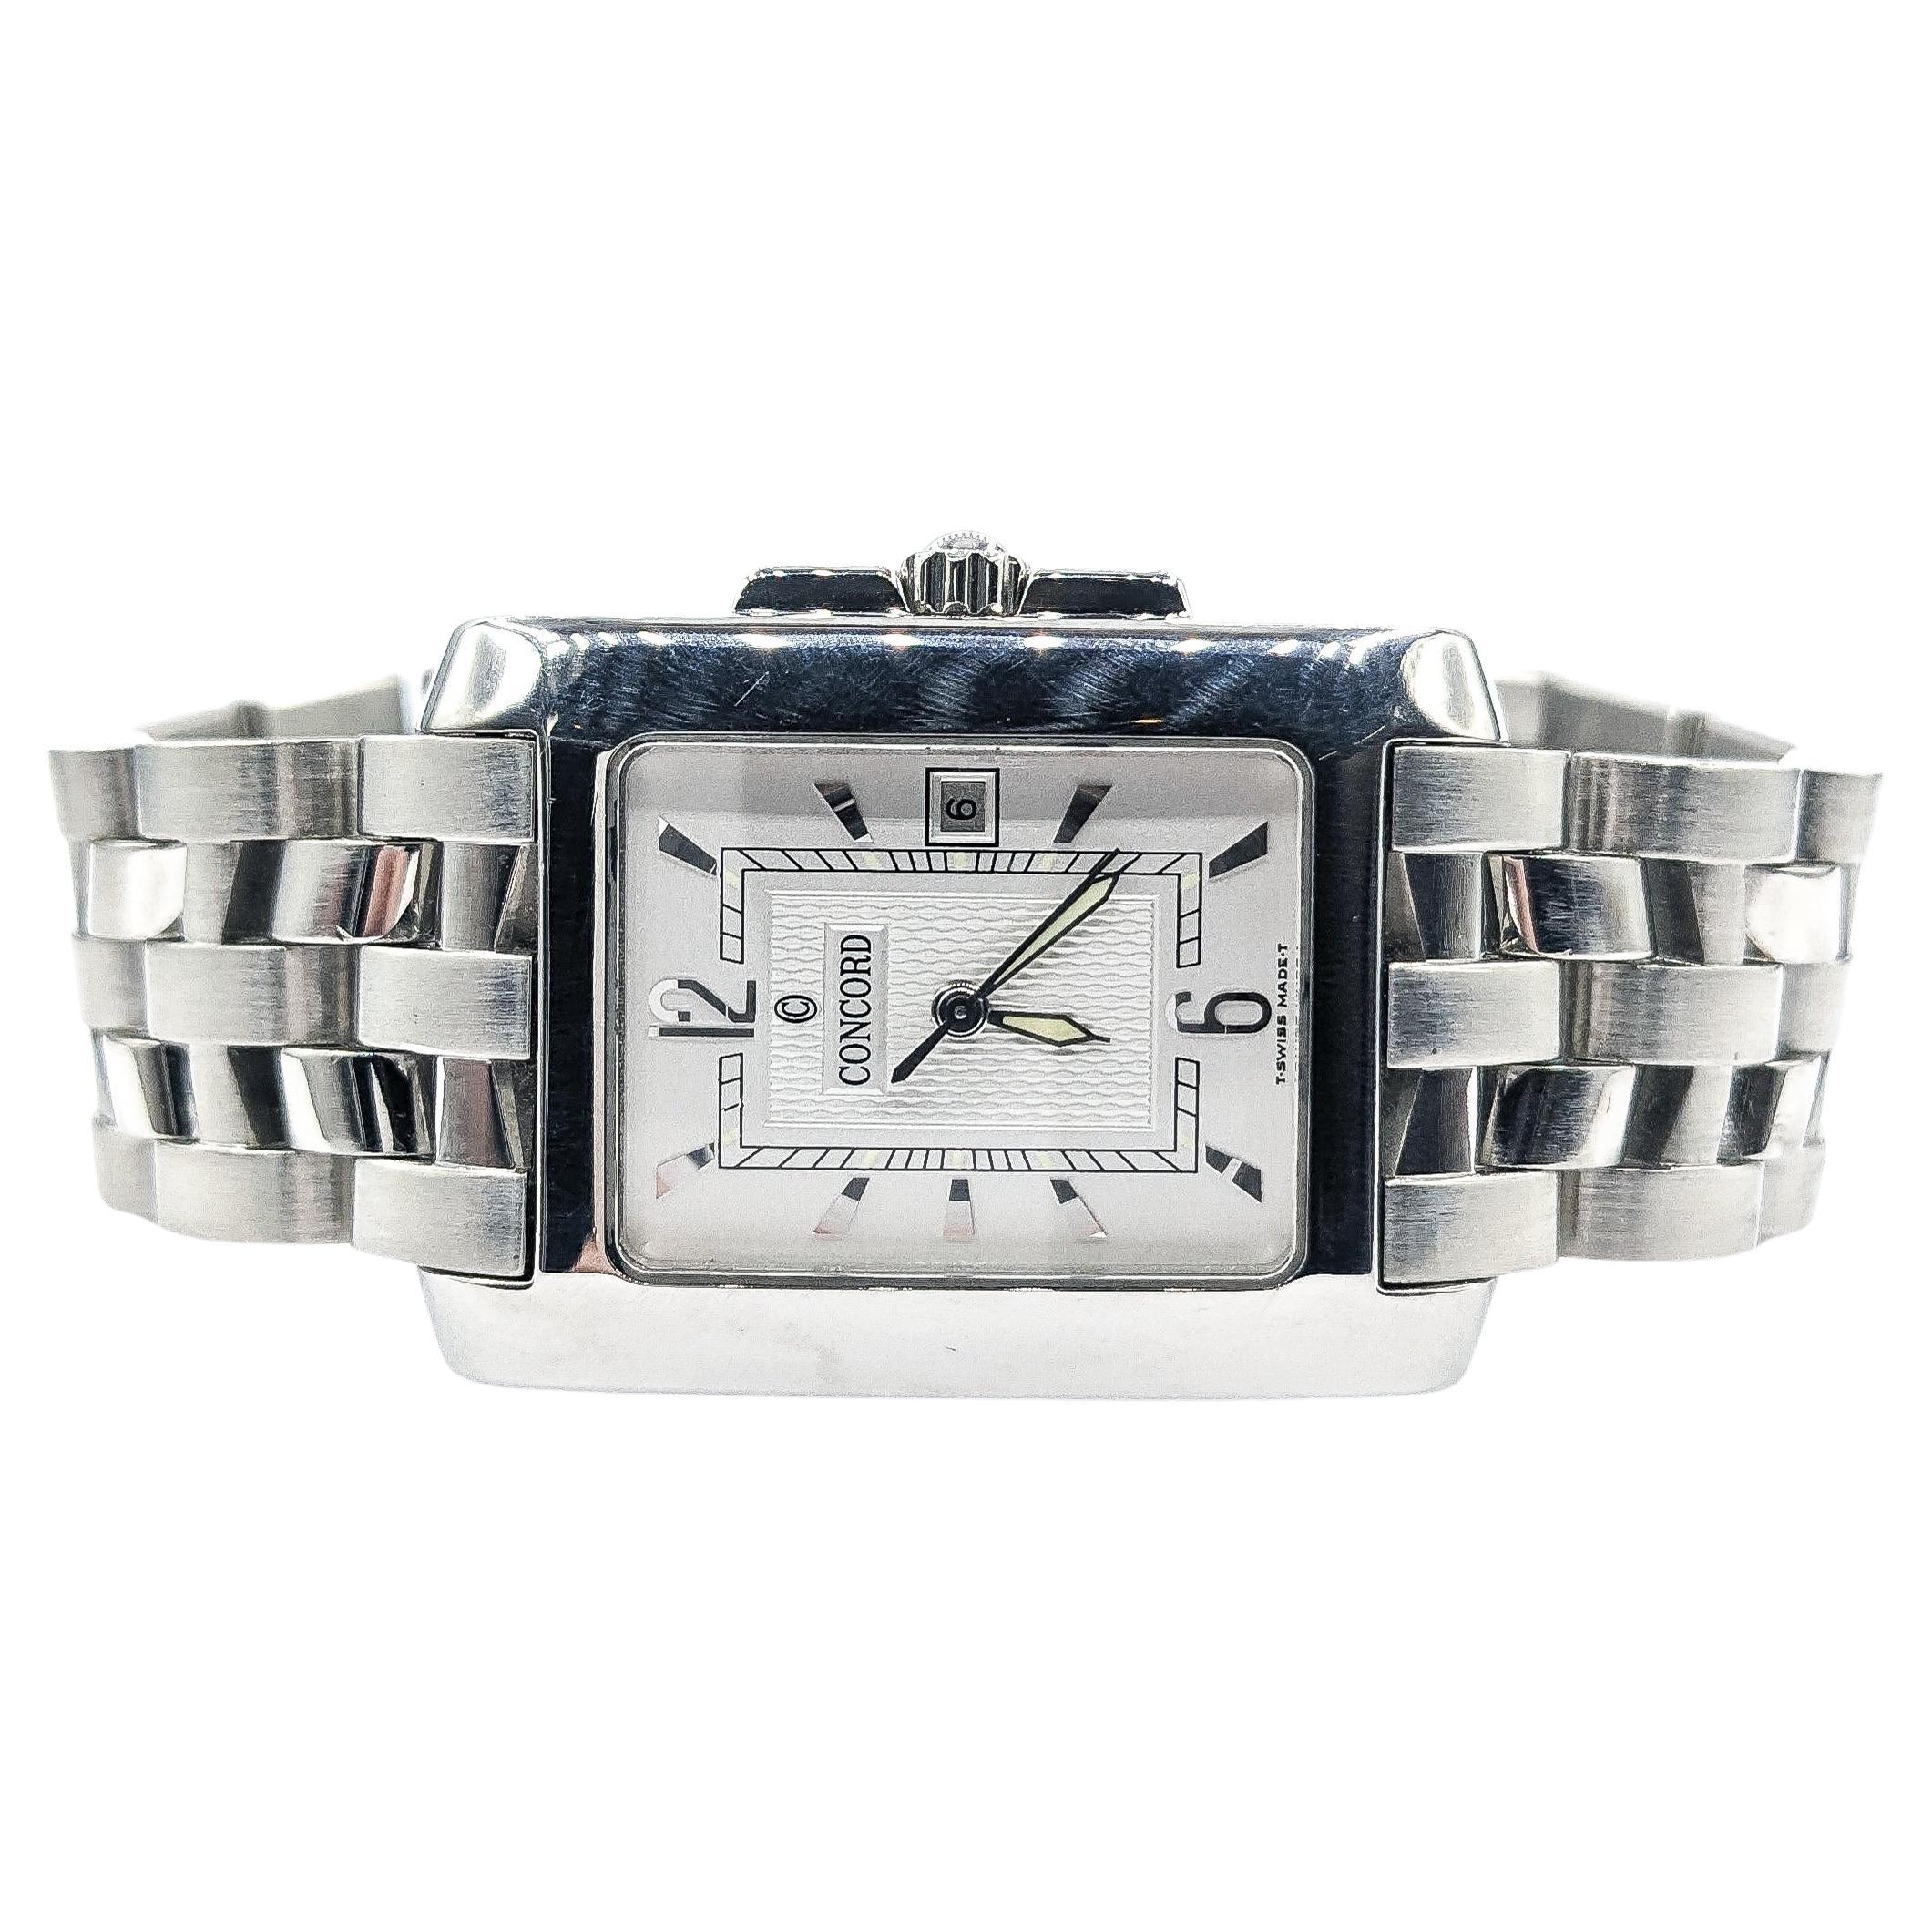 Men's Concord Sportivo Watch In Stainless Steel